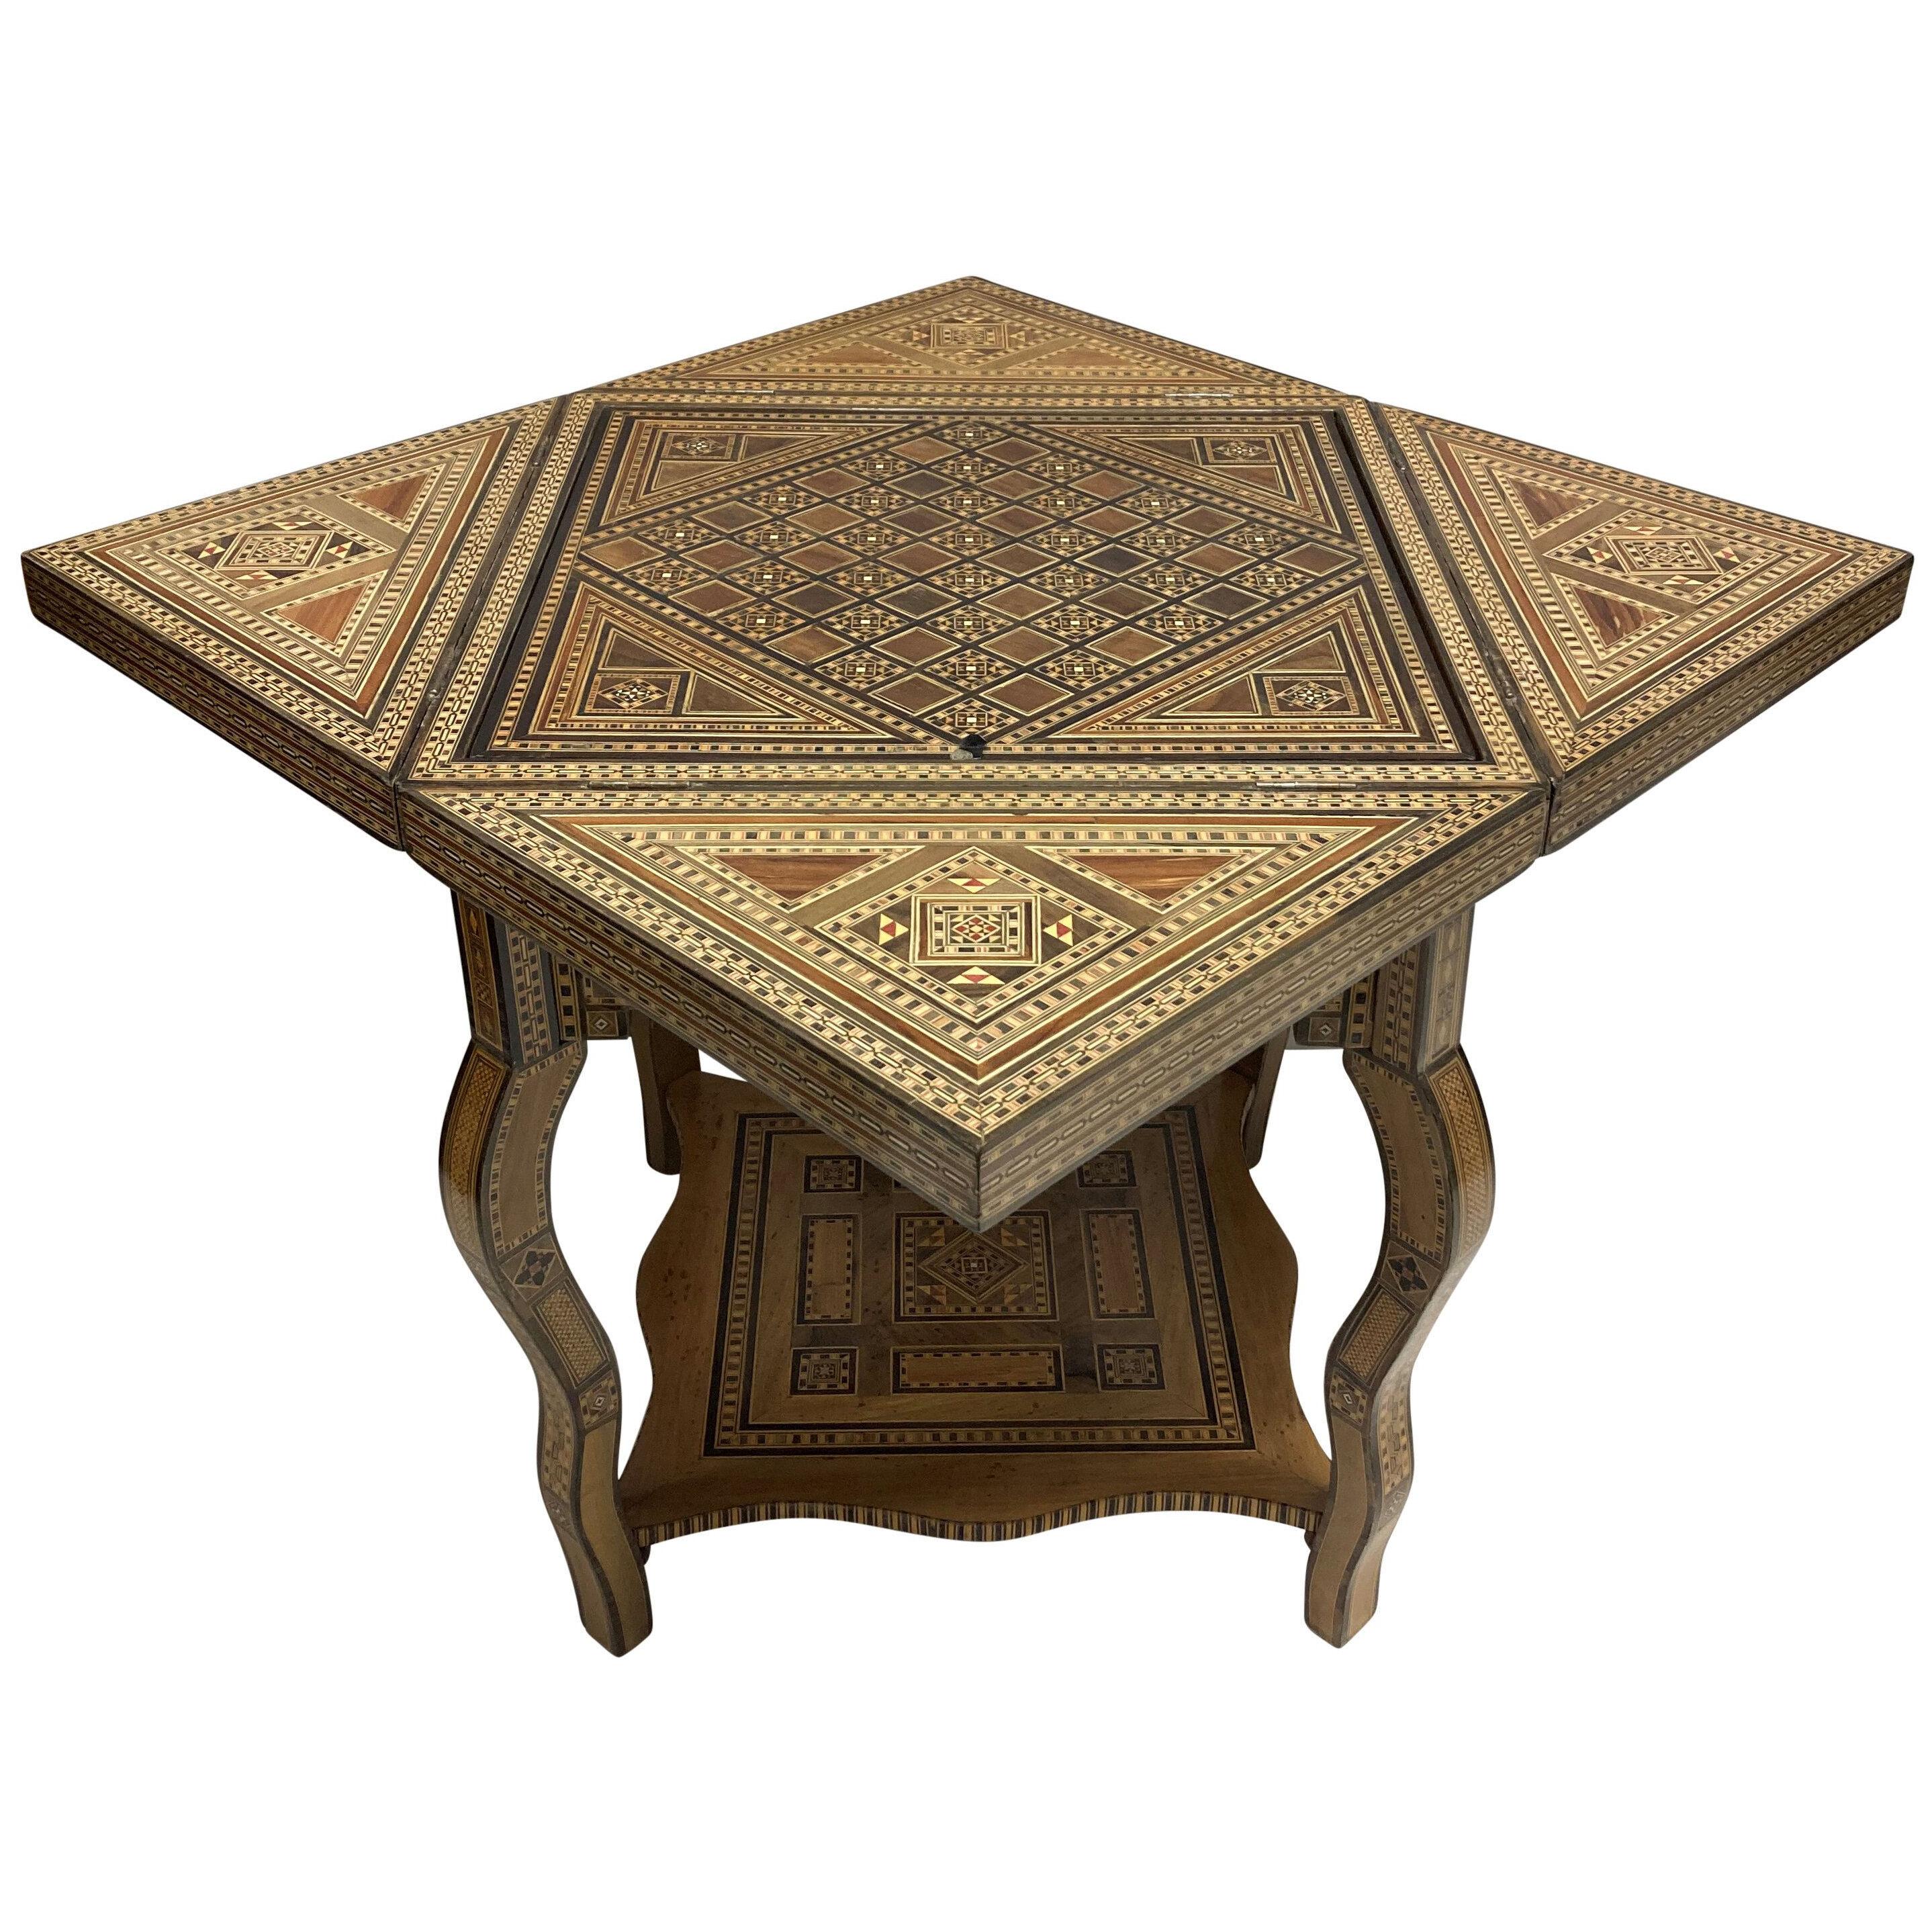 A FINE SYRIAN INLAID GAMES TABLE